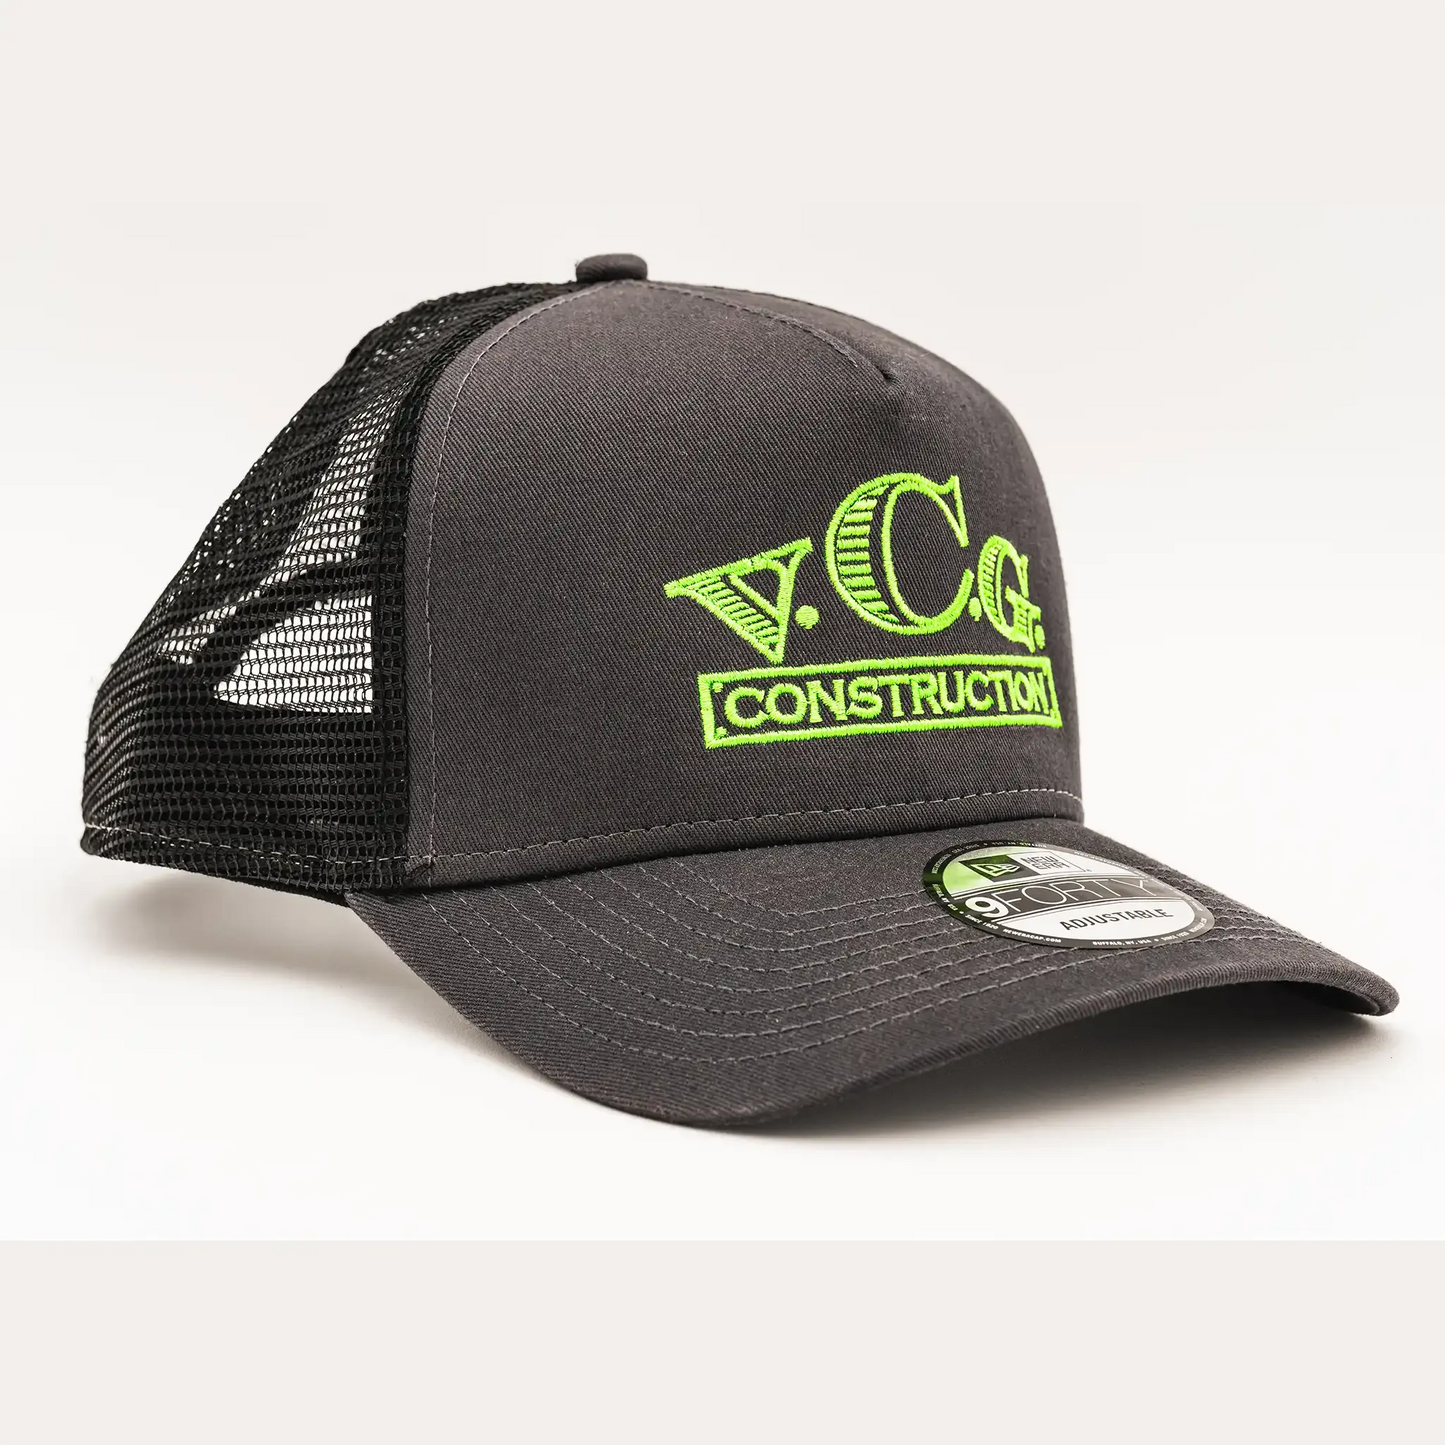 Graphite and black snapback hat with a VCG Construction logo embroidered in high-visibility green thread